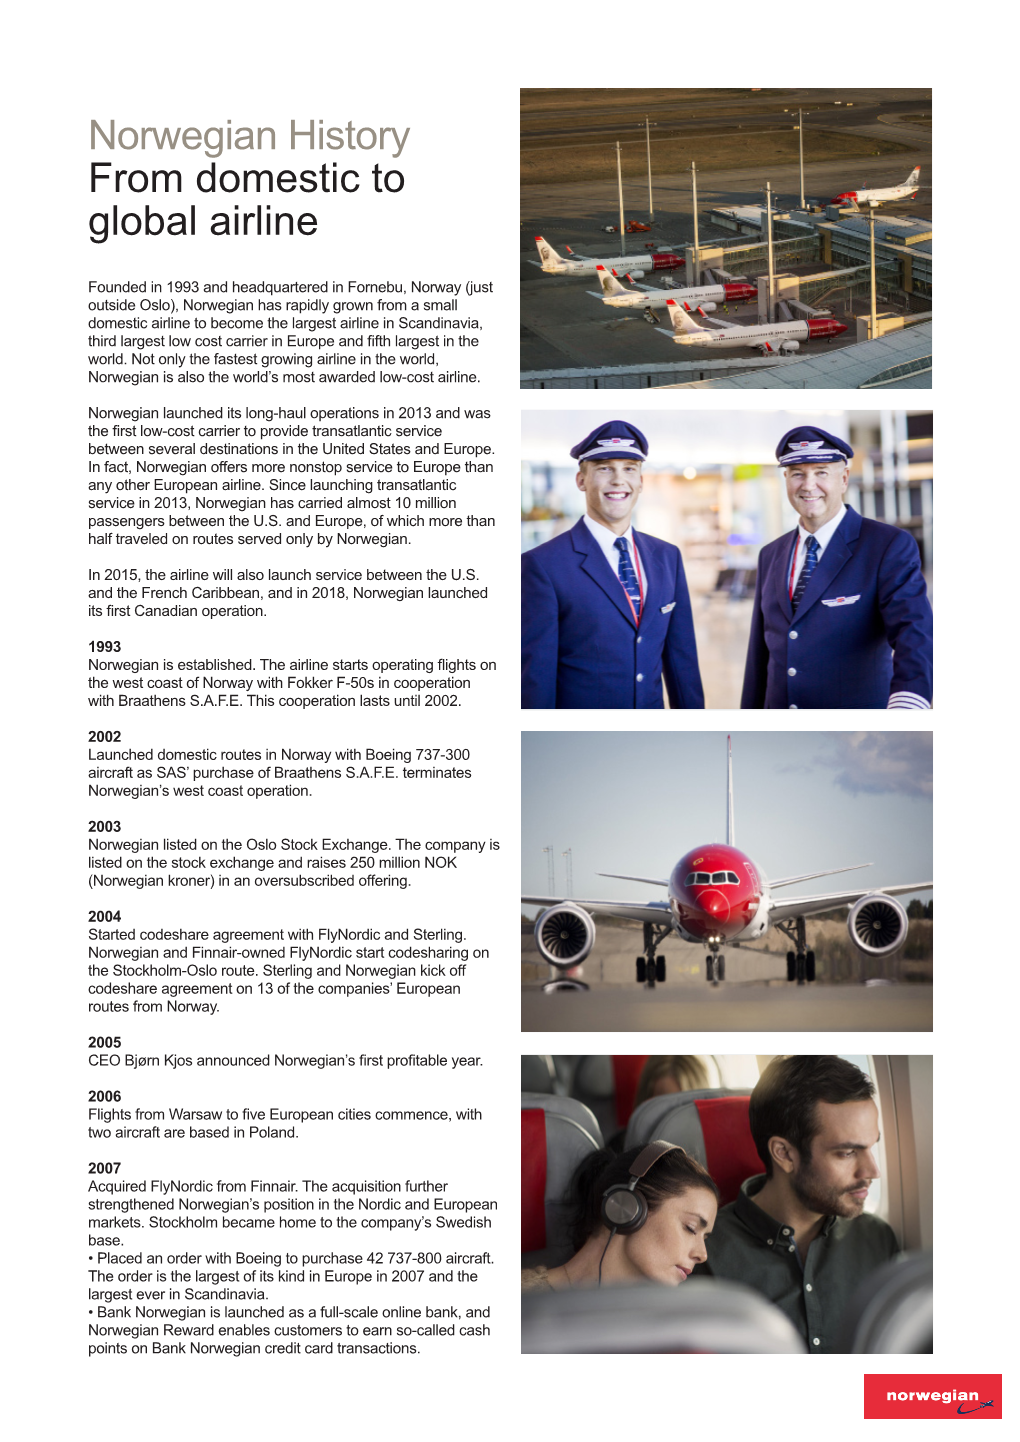 Norwegian History from Domestic to Global Airline